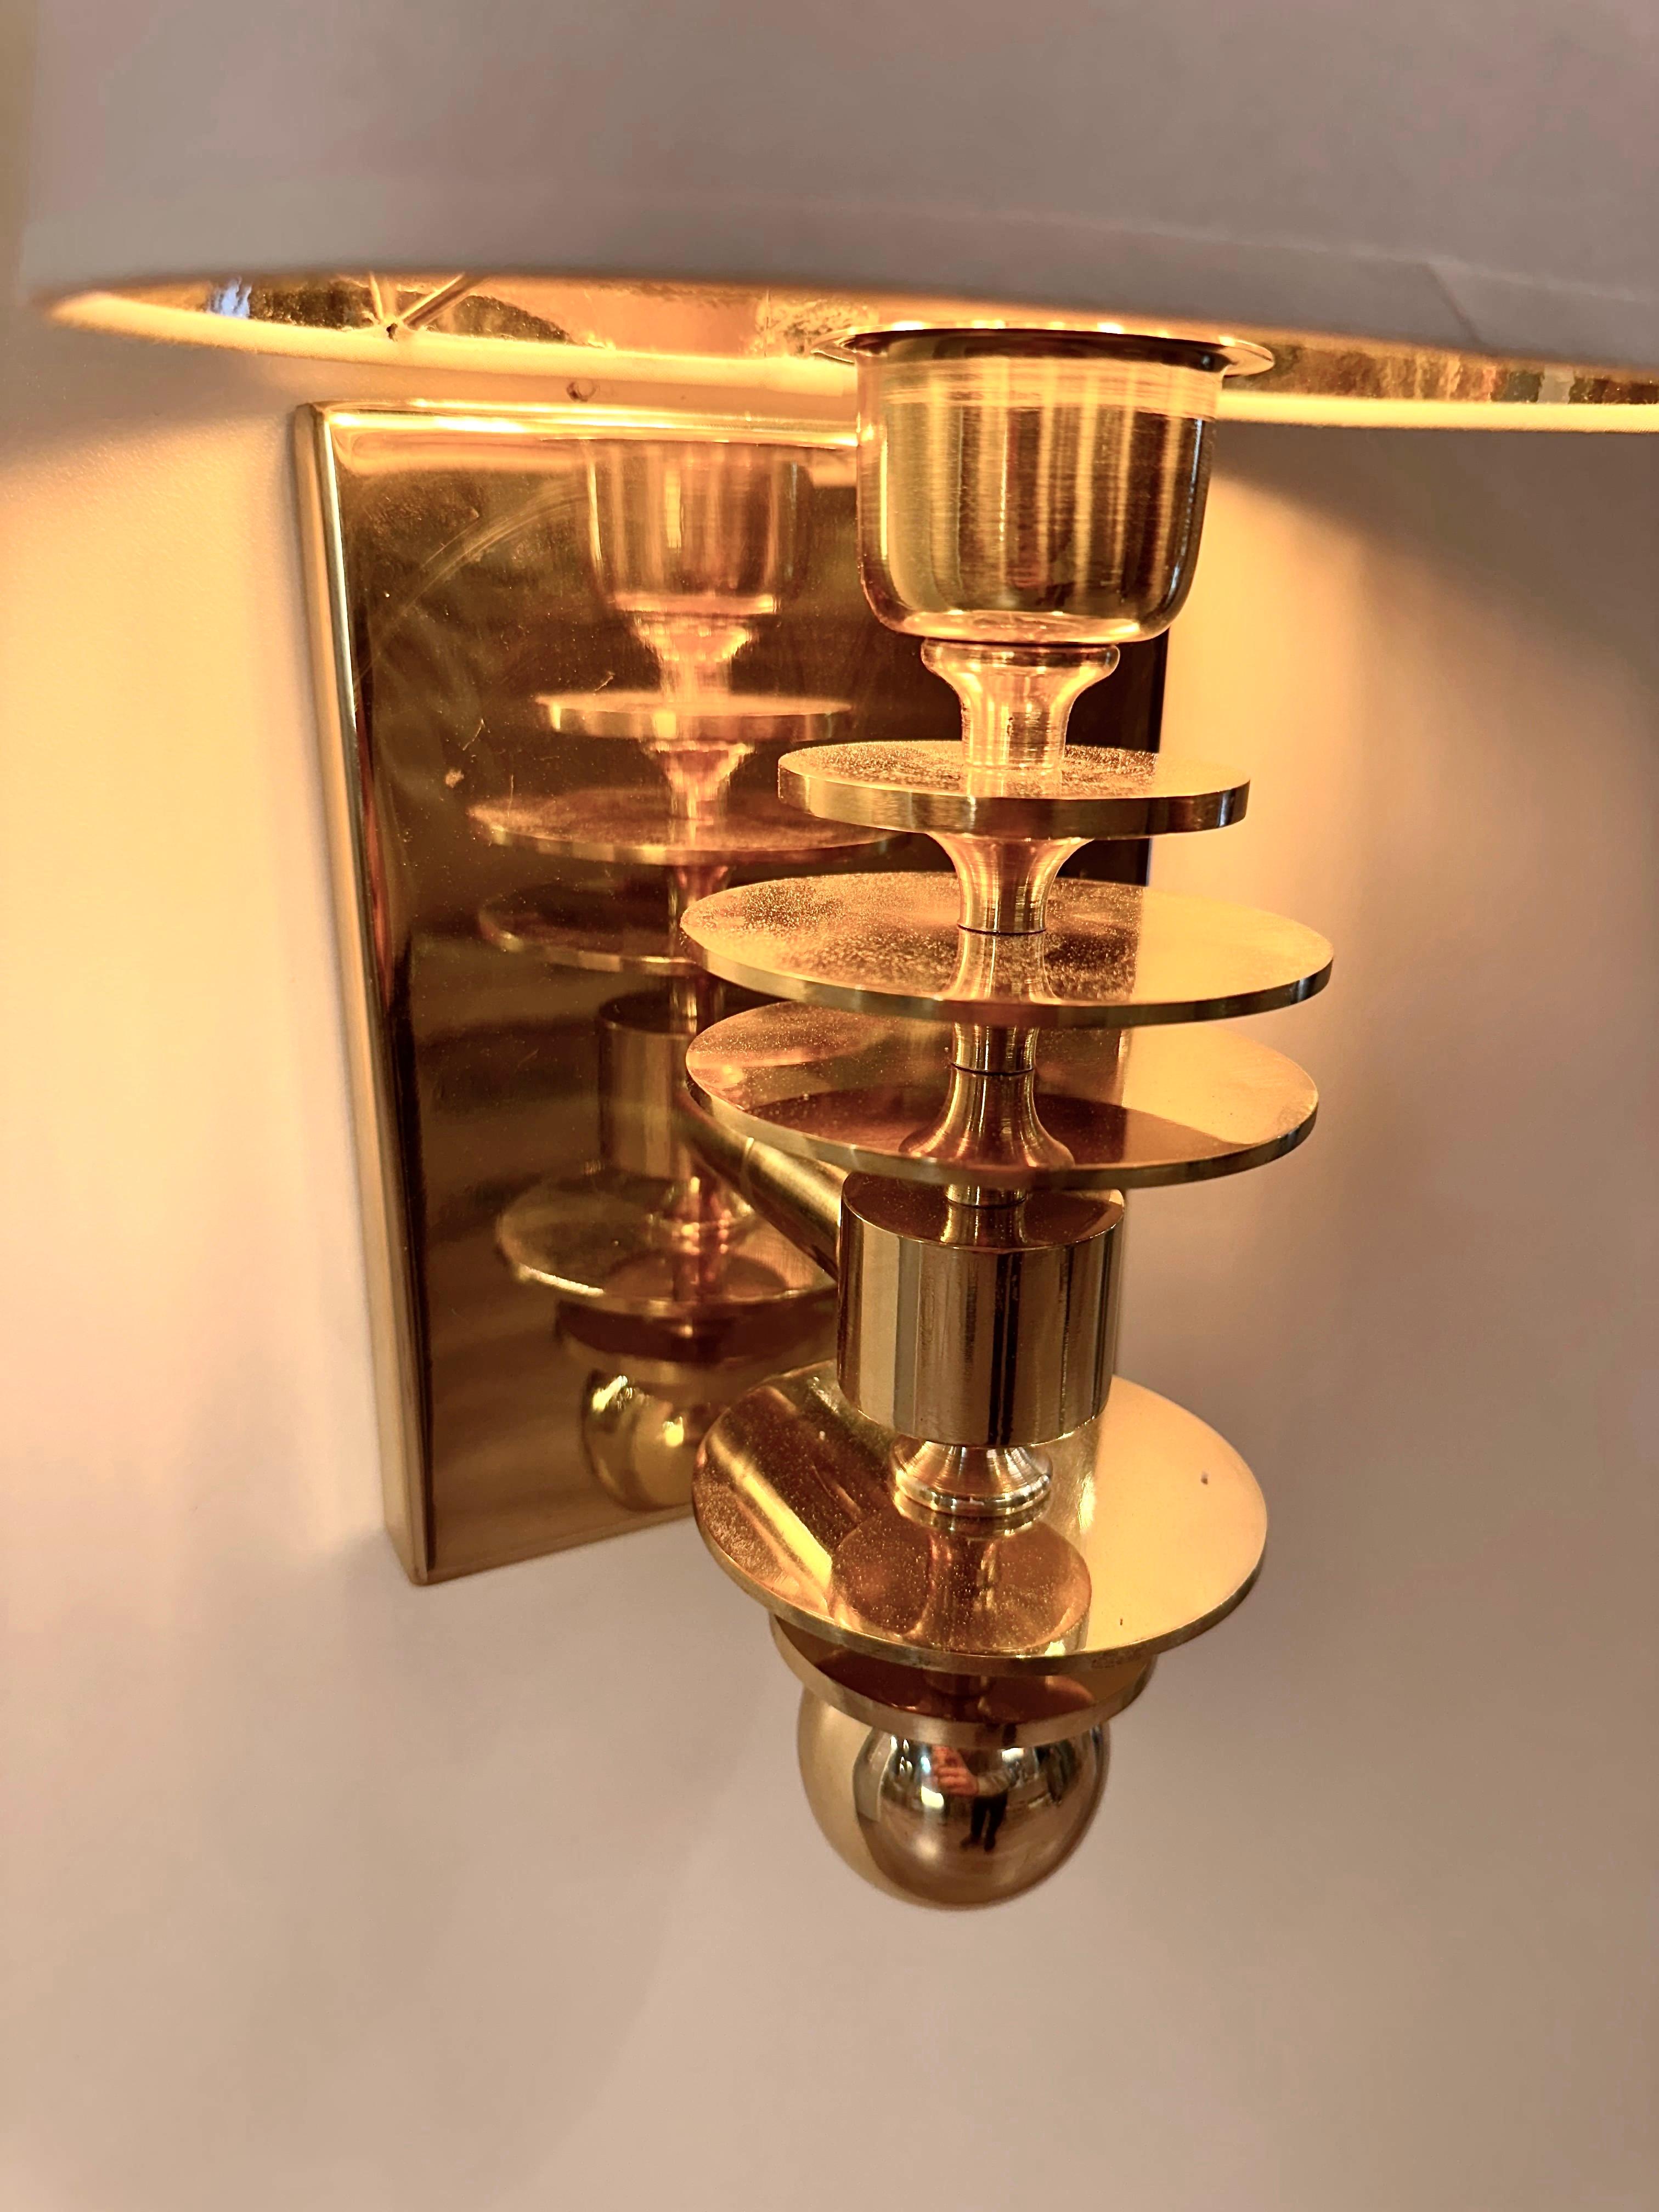 MARSALA brass wall sconce, a stunning example of mid-century modern style lighting. This exquisite wall sconce is crafted with meticulous attention to detail, featuring a body composed of different circle turned brass parts topped with a sleek